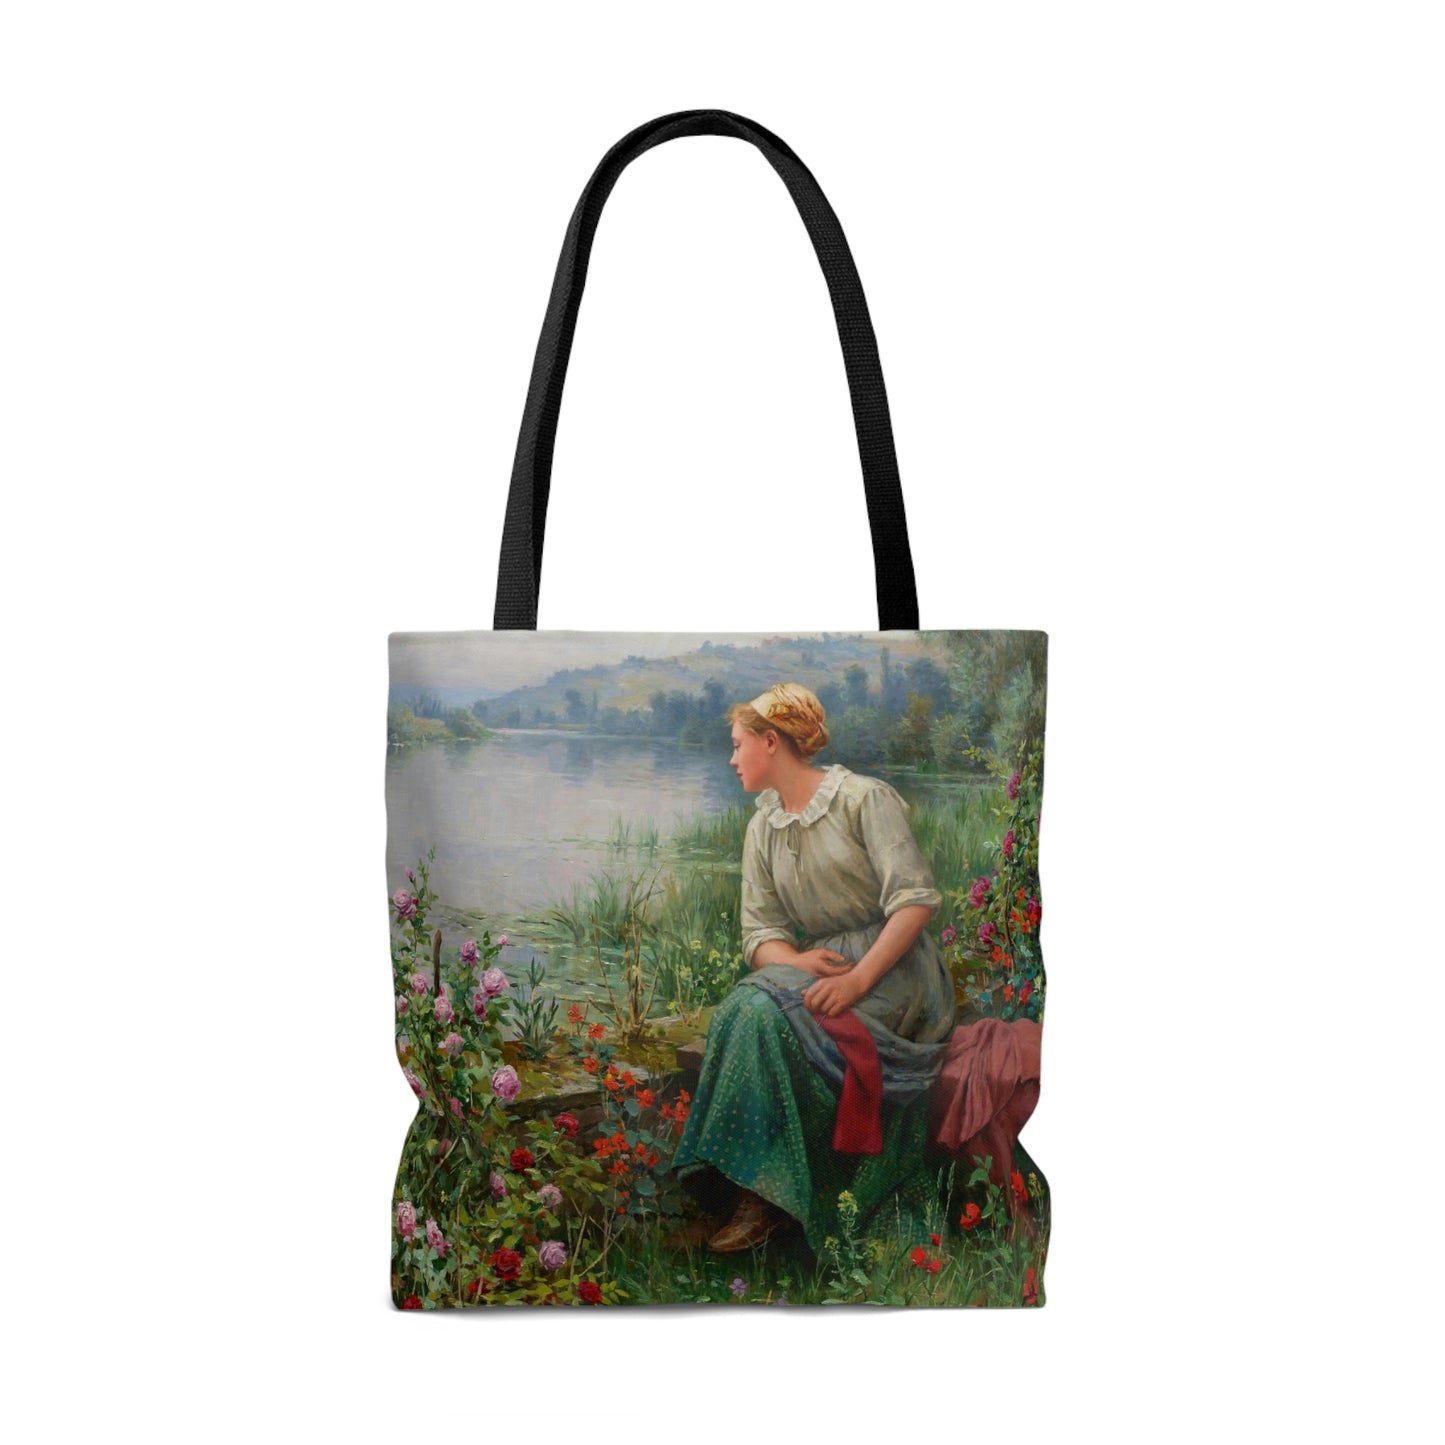 Daniel Ridgway Knight: "Maria by the River" - AOP Tote Bag